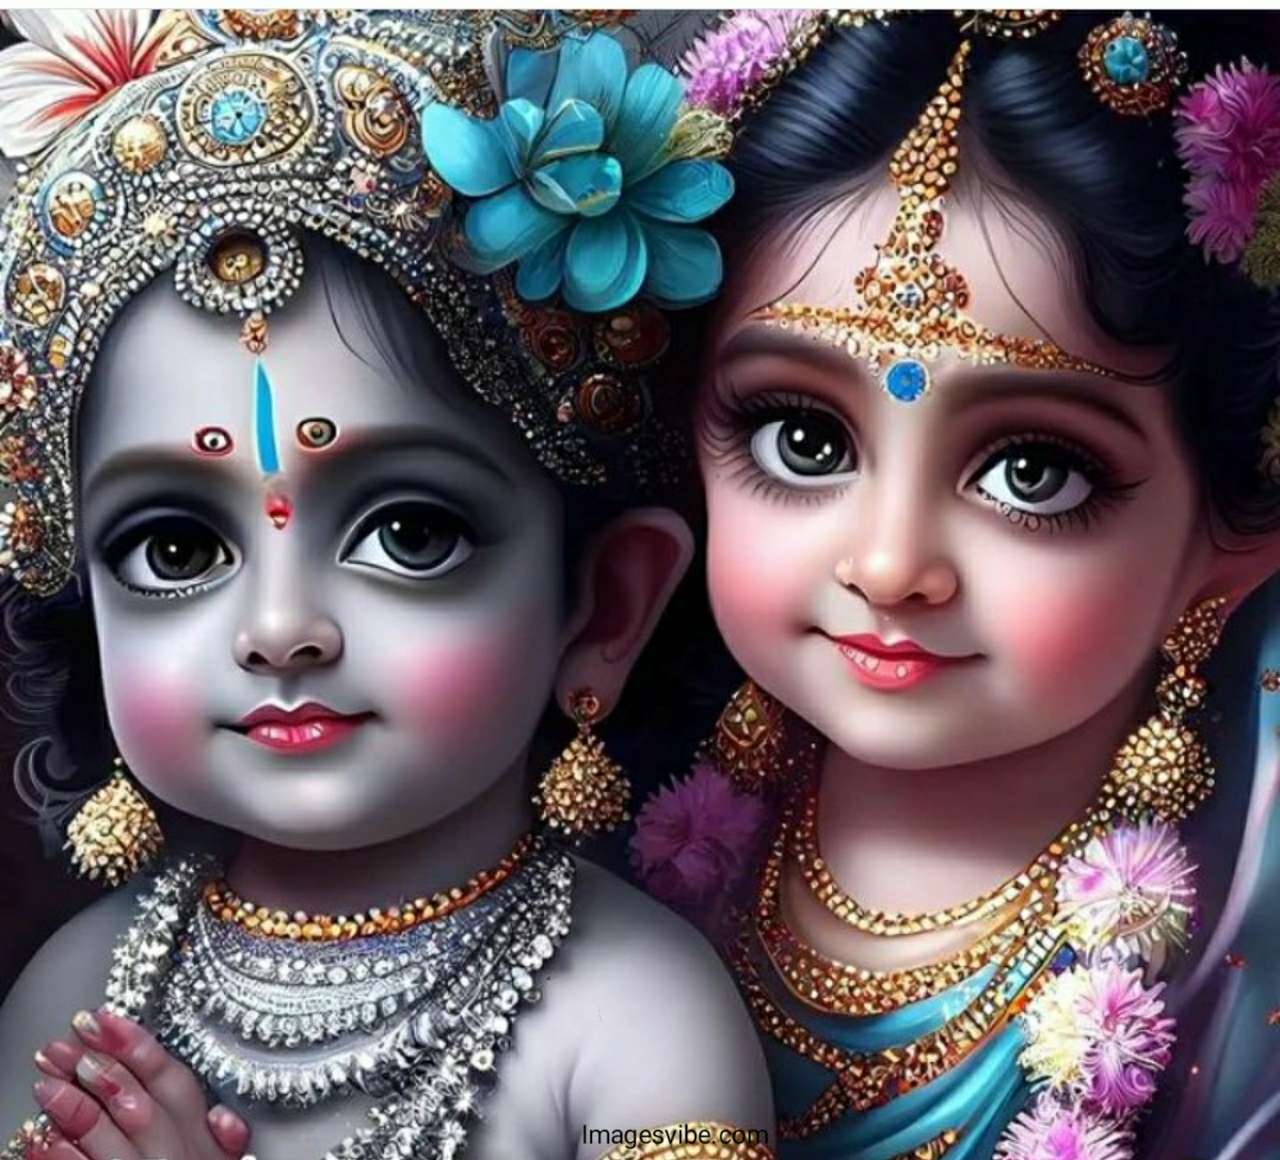 Download Over 999 Beautiful Radha Krishna Images – Incredible Collection of Full 4K Radha Krishna Images for Download